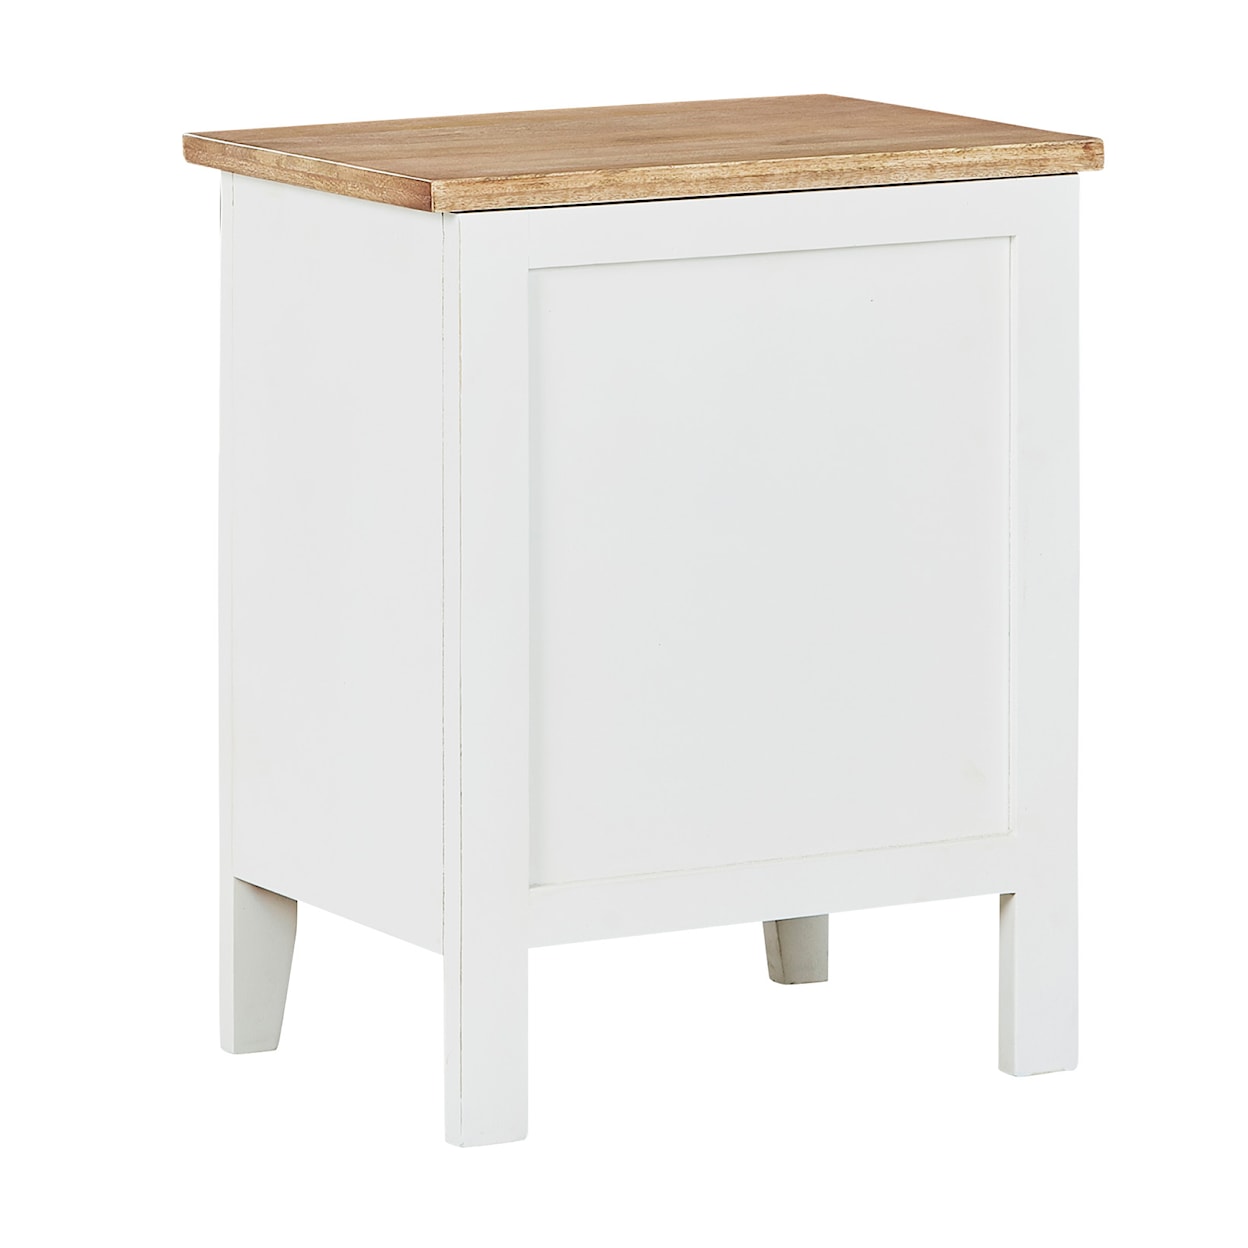 Signature Design by Ashley Furniture Gylesburg Accent Cabinet